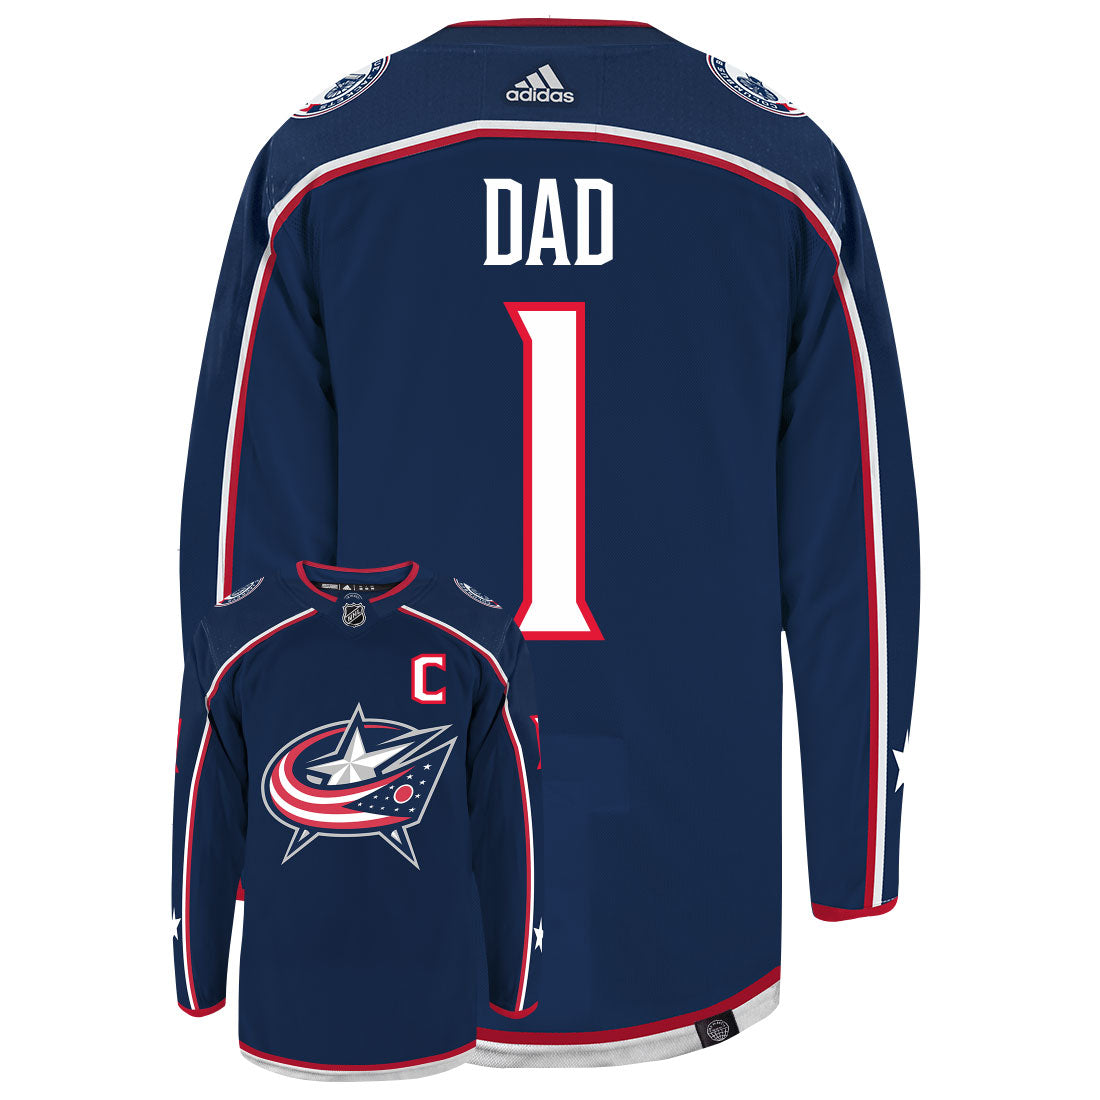 Columbus Blue Jackets Dad Number One Adidas Primegreen Authentic NHL Hockey Jersey